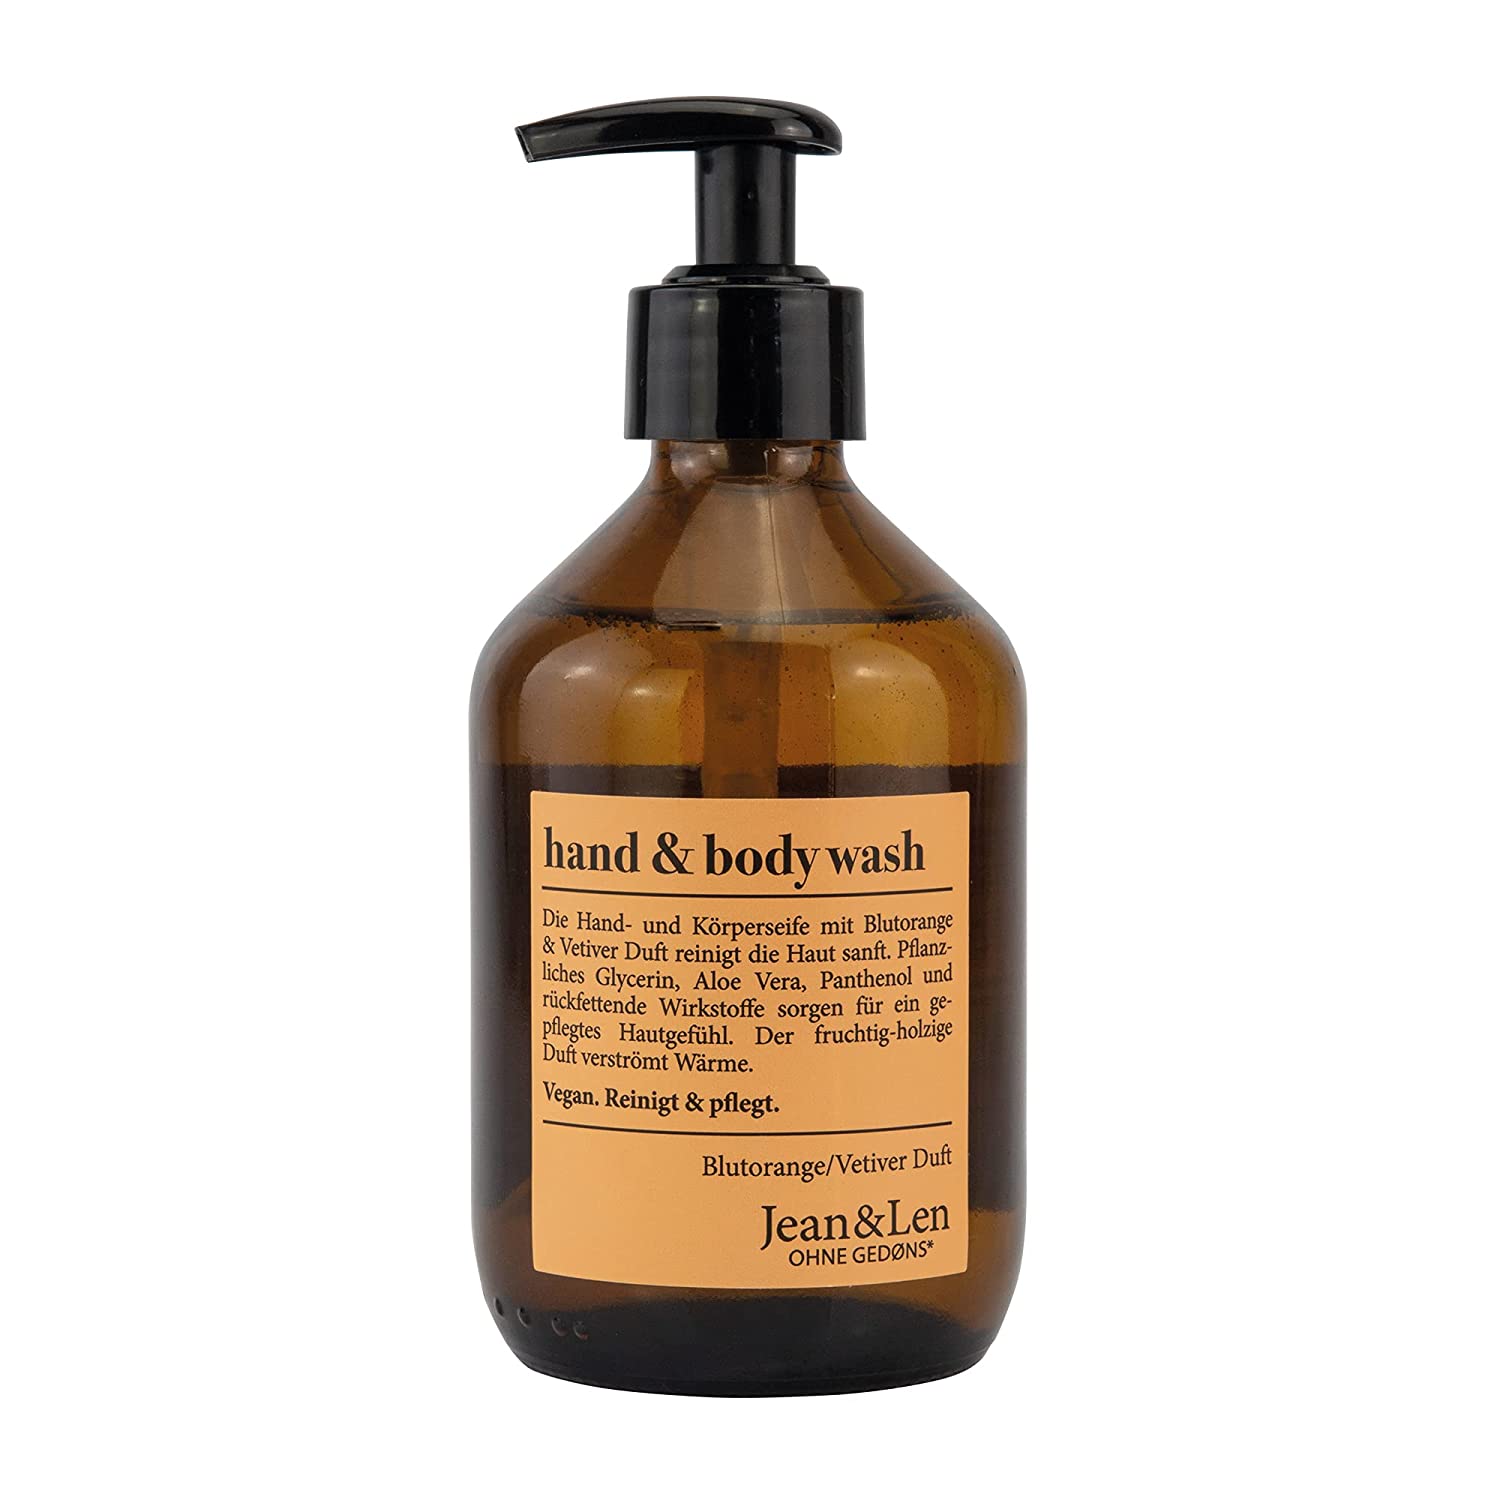 Jean & Len Hand and Body Wash Fruity Scented of Blood Orange and Woody Vetiver, Glass Bottle, Sustainable, 300 ml